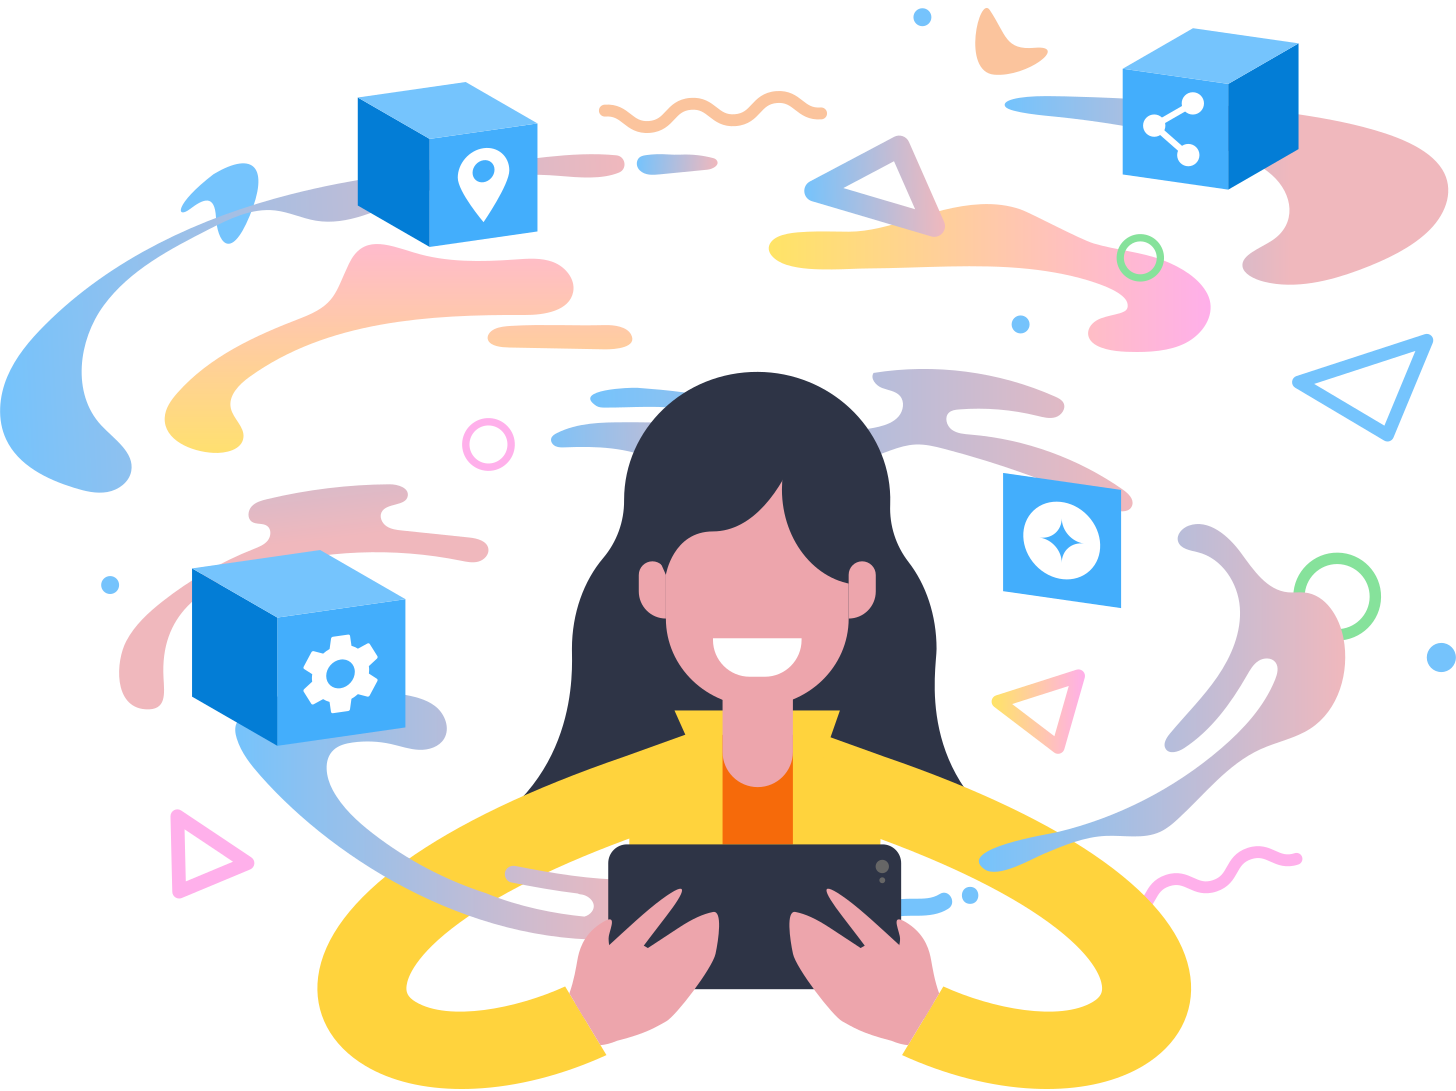 Illustration of a female user looking at a mobile device with decentralized apps swirling around her.